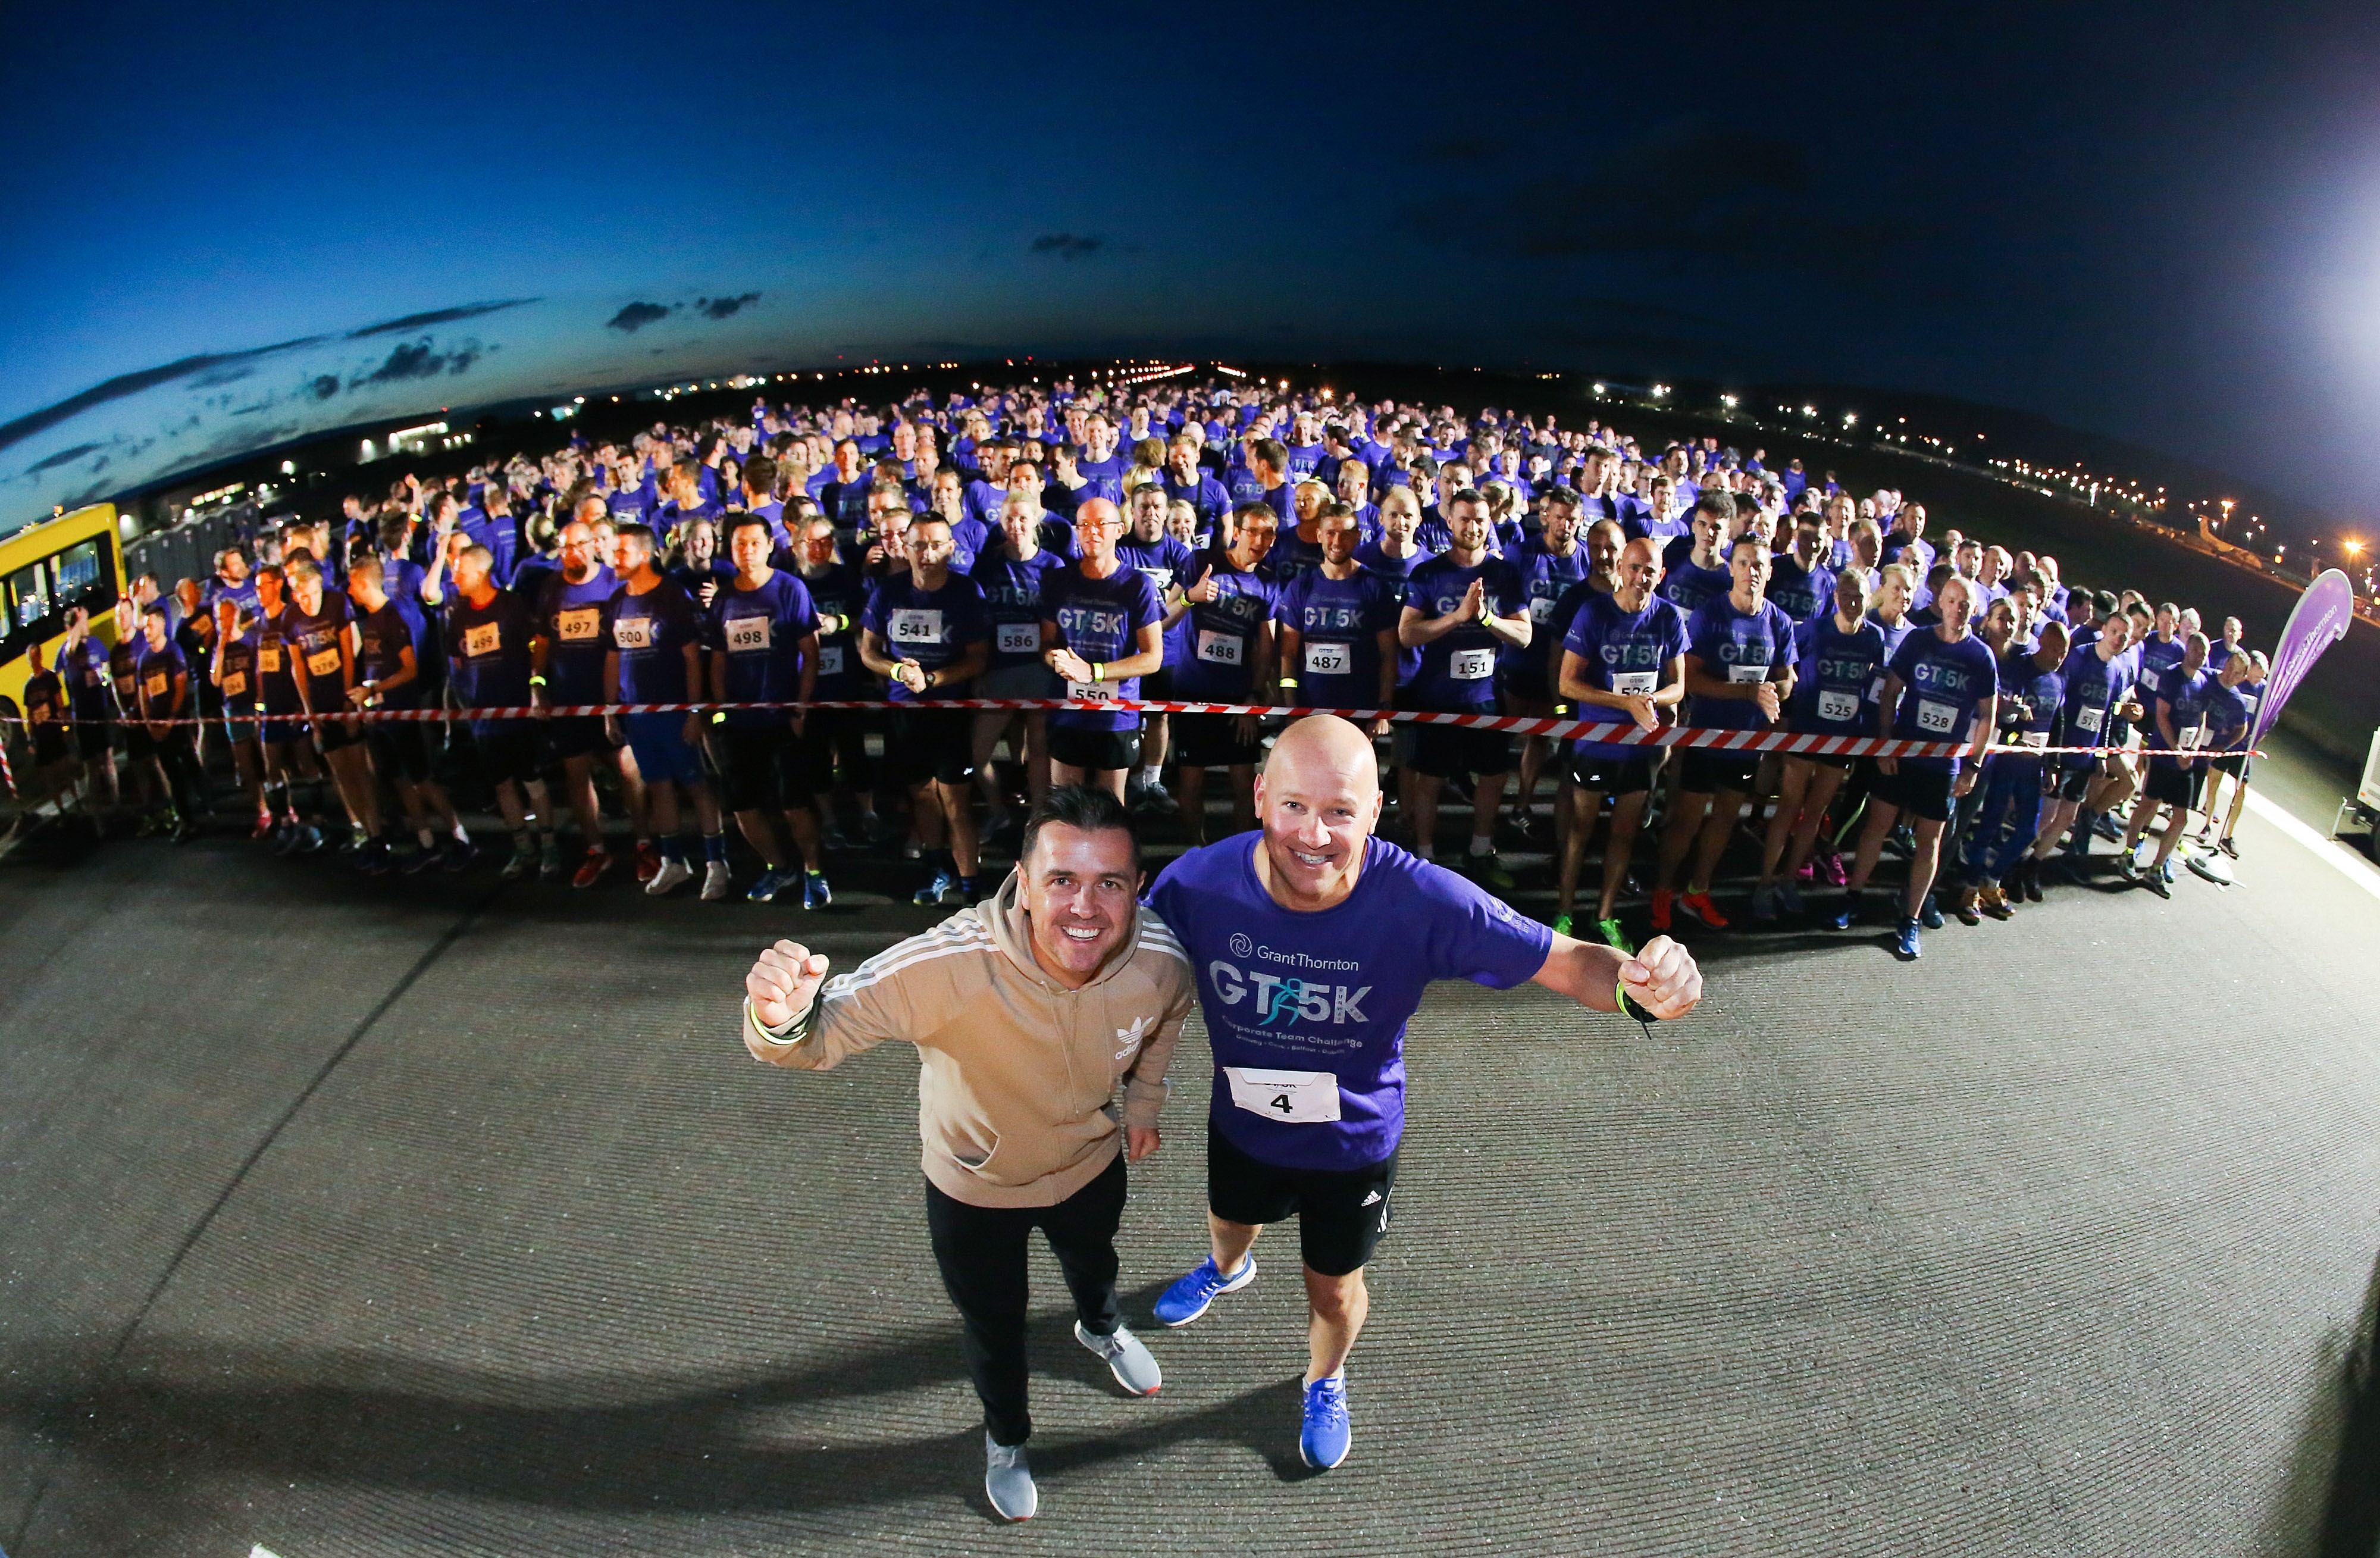 The Grant Thornton Runway Run, which took place last night (Thursday 21 June), was a ...4000 x 2618